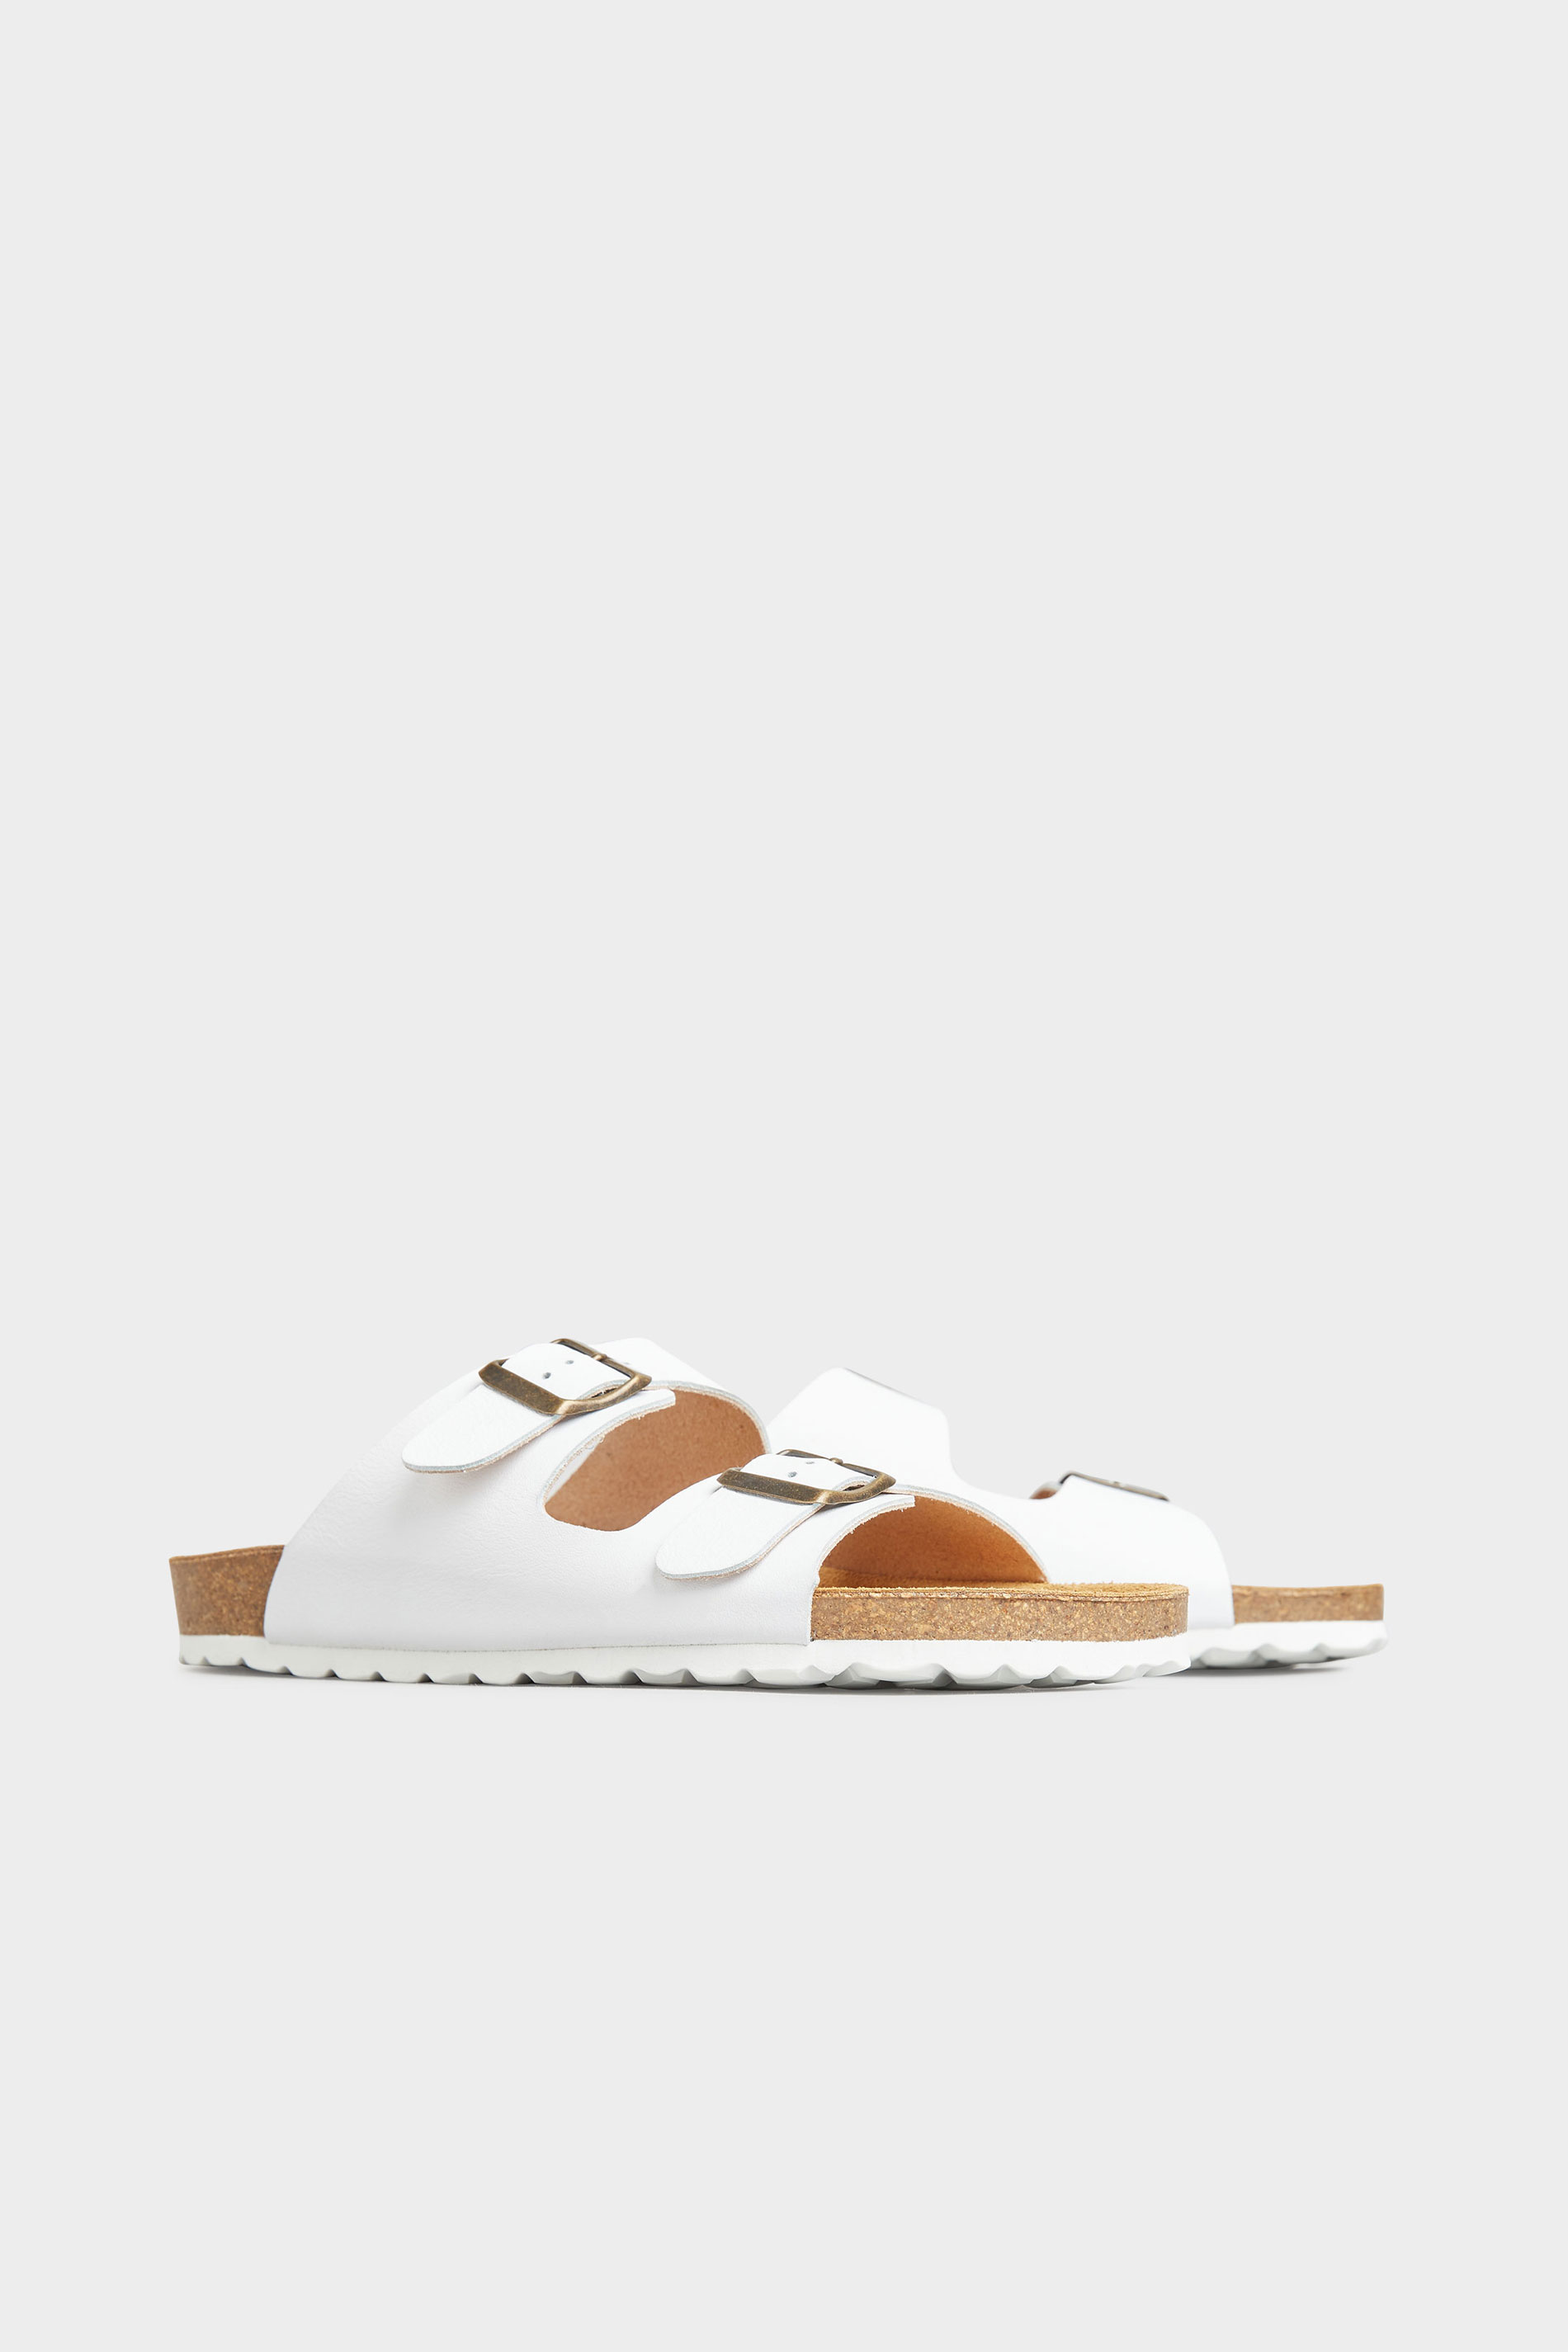 White Leather Two Buckle Footbed Sandals_B.jpg